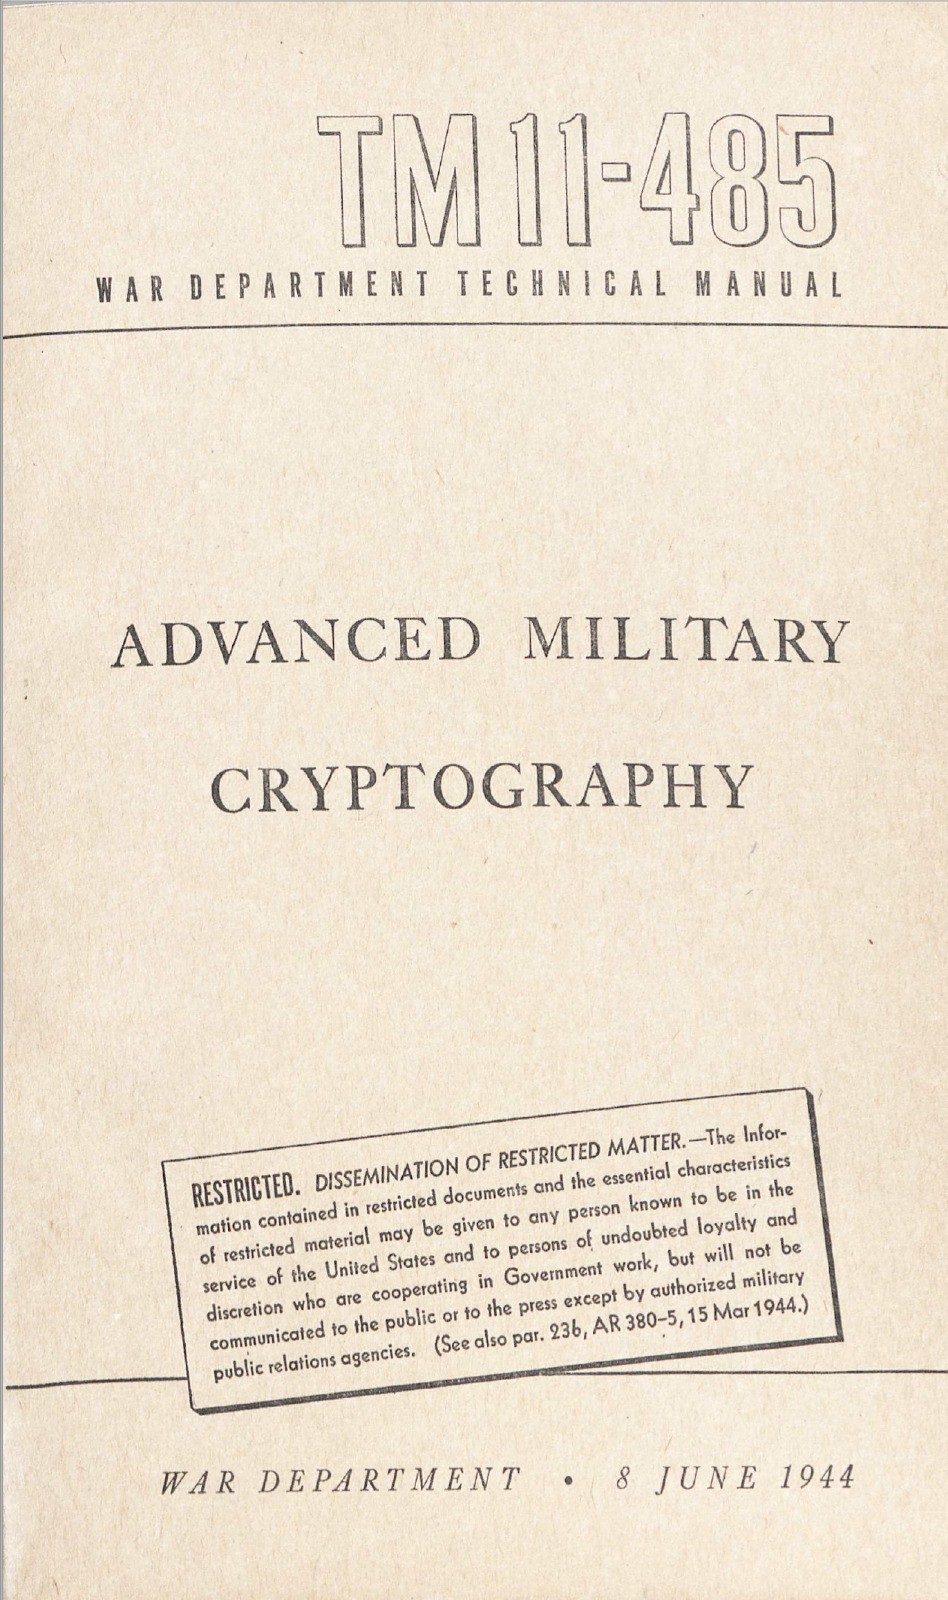 115 Page June 1944 TM 11-485 ADVANCED MIL CRYPTOGRAPHY Technical Manual on CD